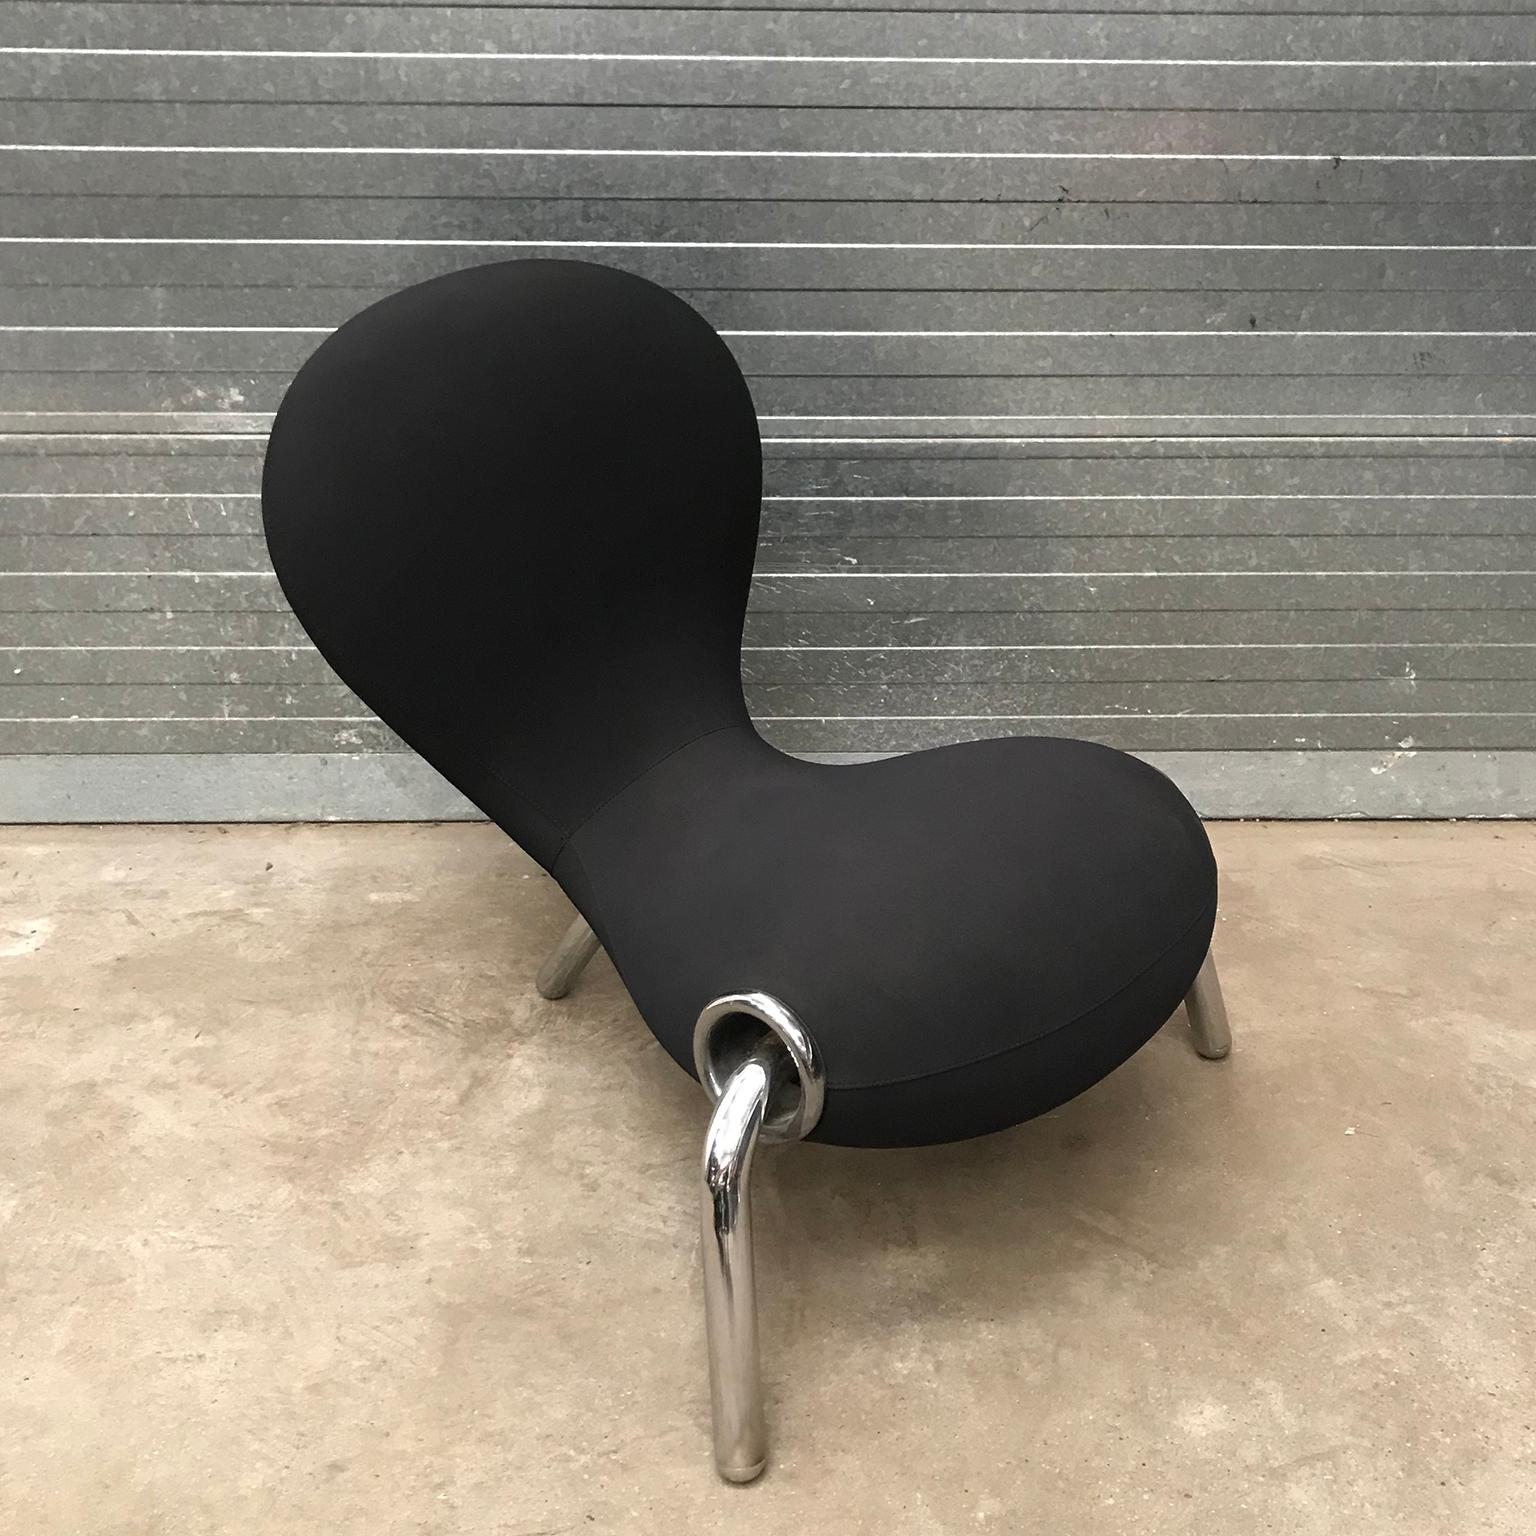 Please ask KC Godrie Ibiza/Amsterdam for our competitive personal shipping quotes.

Black Embryo chair in black upholstery and chrome legs. The embryo chair was designed by Marc Newson in 1988. This chair was commissioned by the Museum of Applied